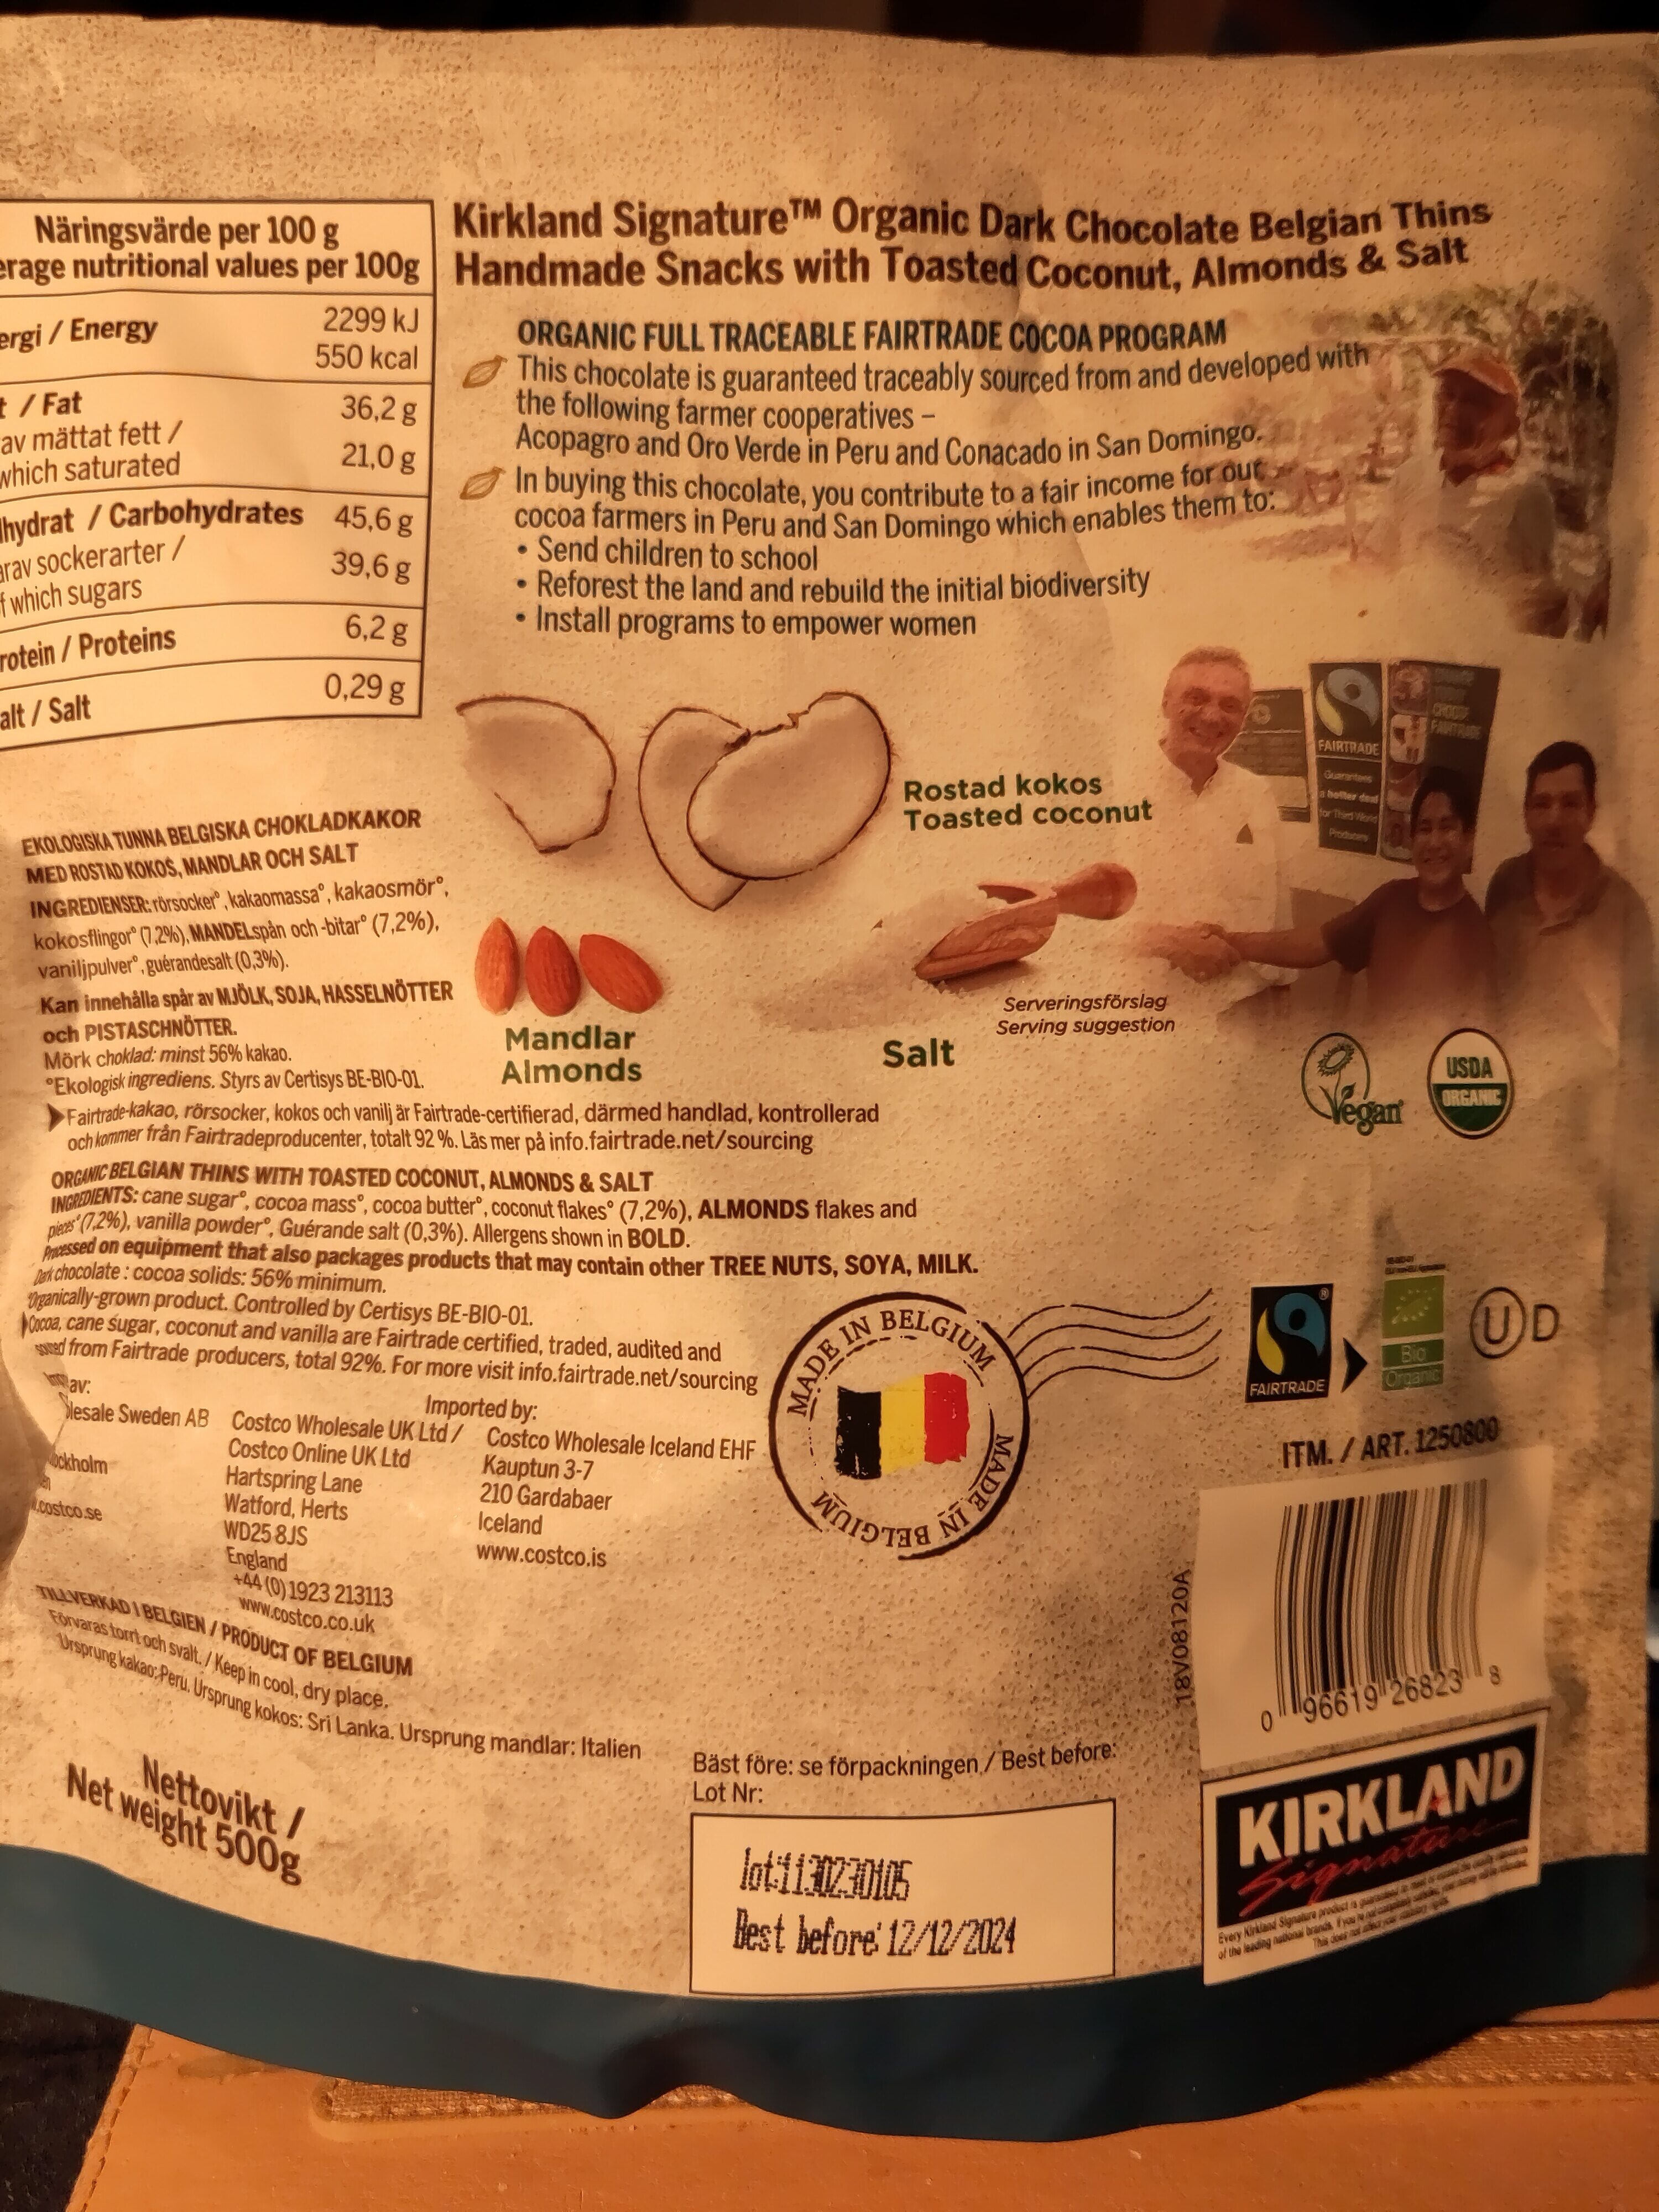 Organic Dark Chocolate Belgian Thins - Recycling instructions and/or packaging information